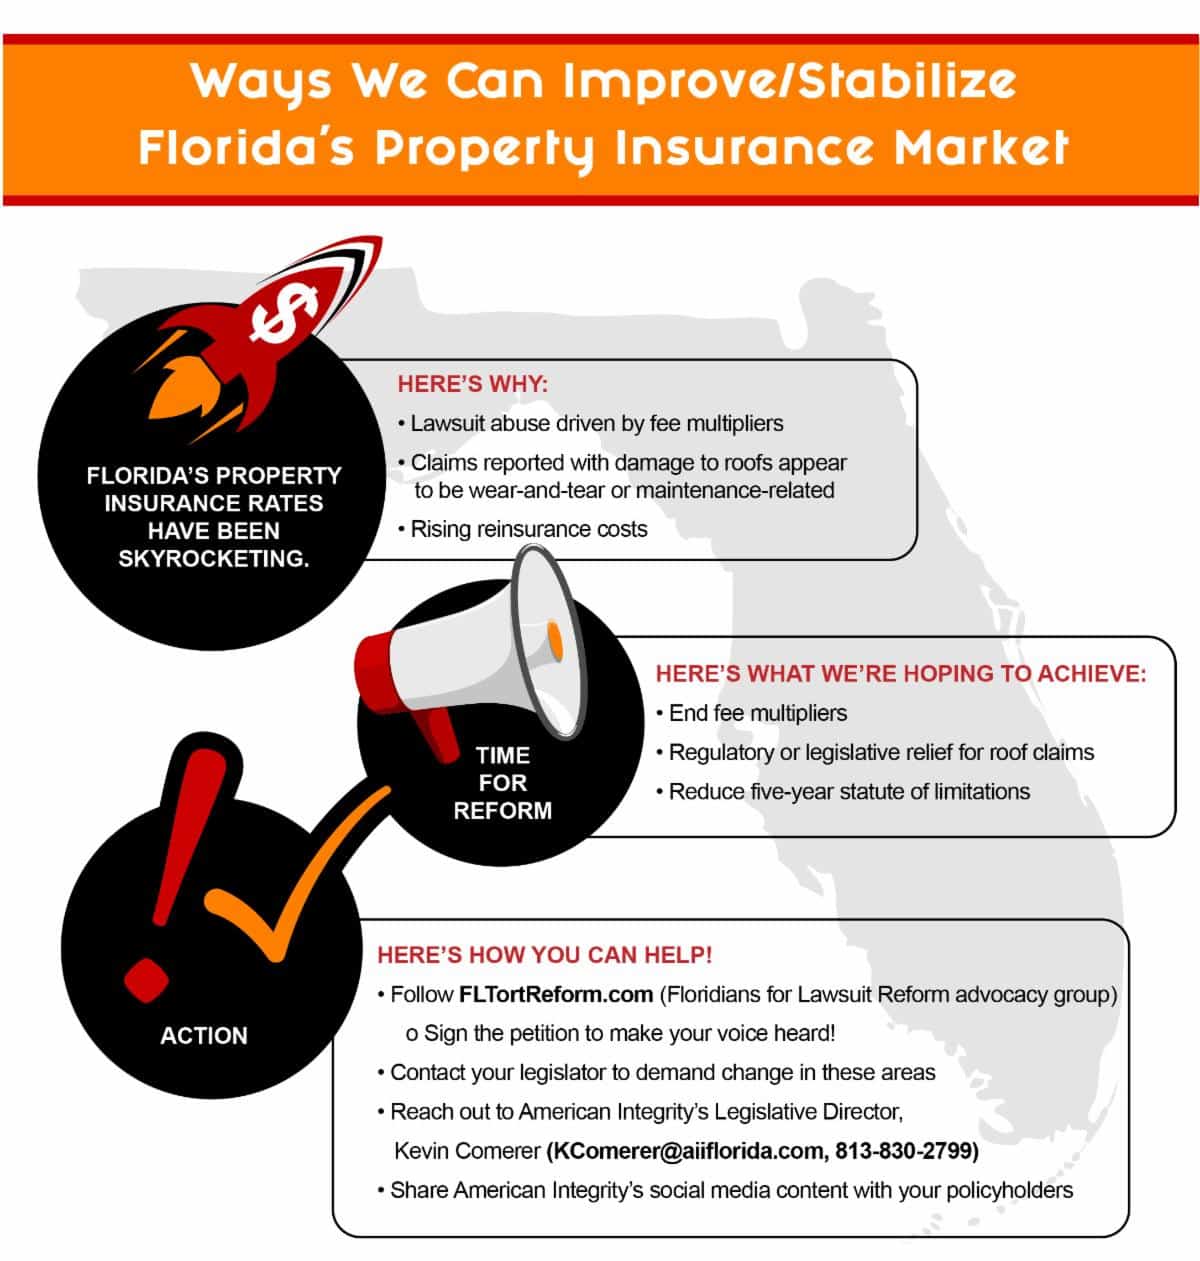 improve and stabilize floridas property insurance market info graphic